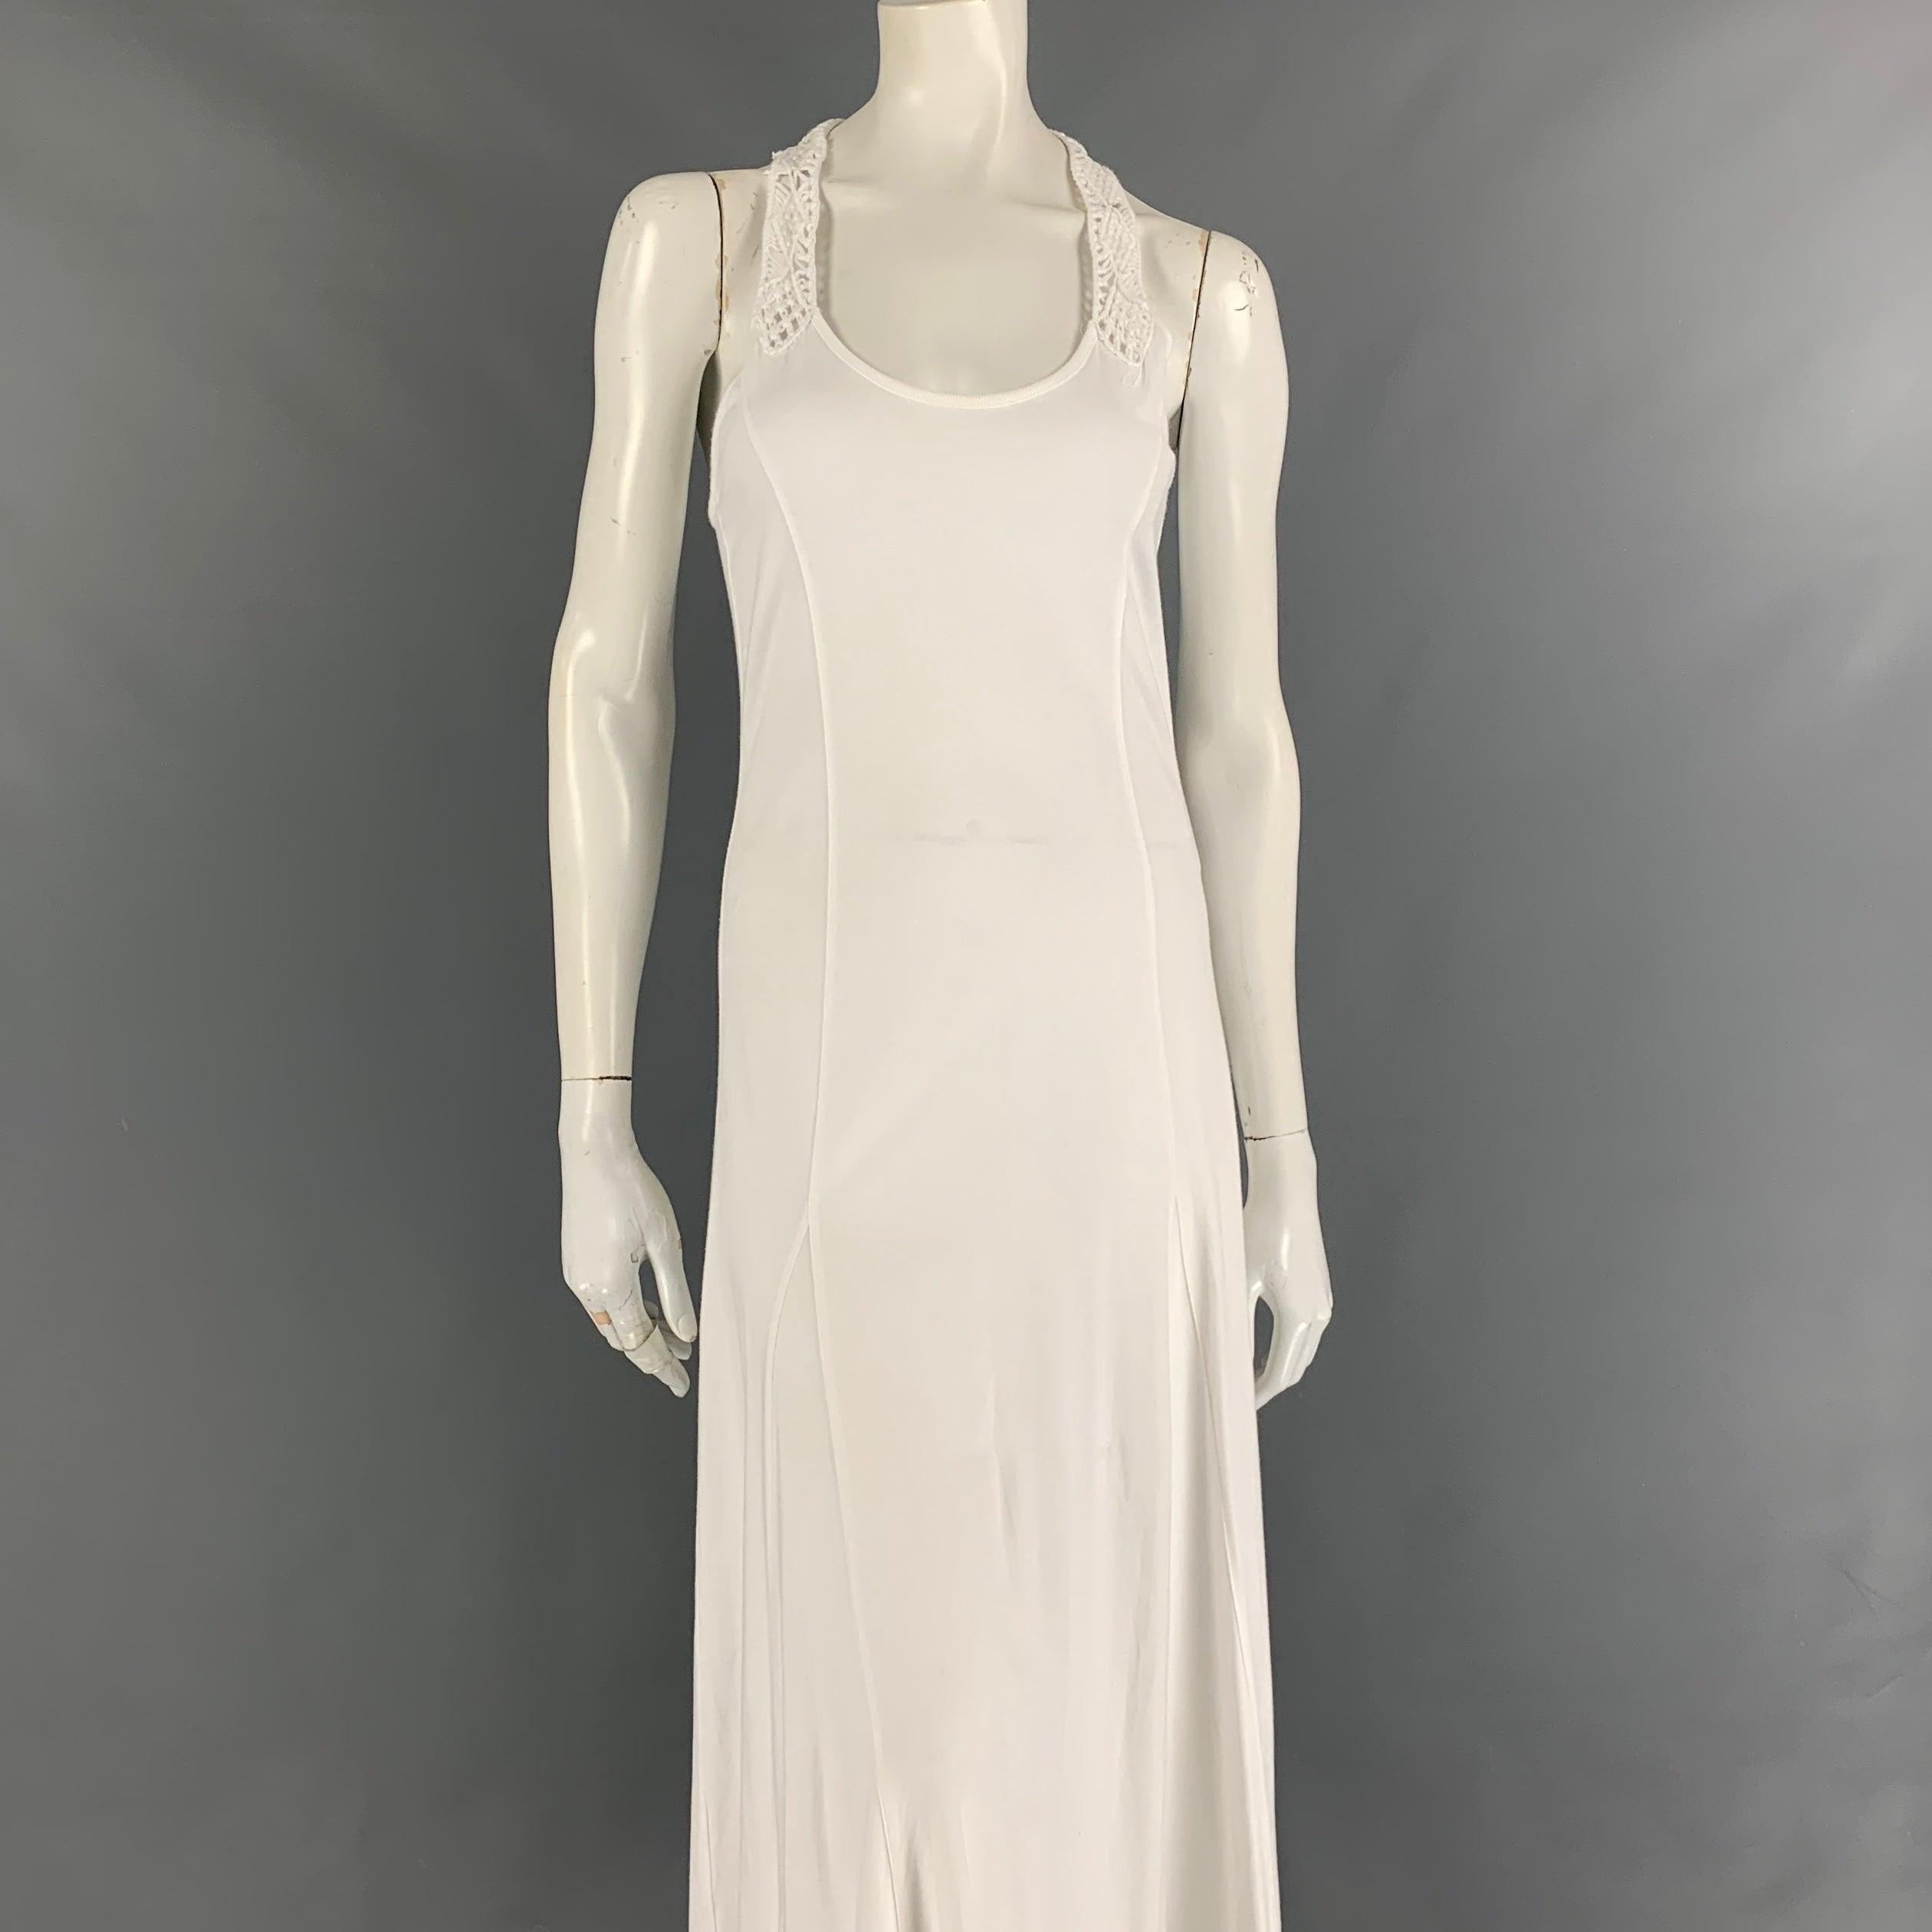 RALPH LAUREN 'Black Label' dress comes in a white cotton featuring a sleeveless style and a crochet racerback.
Very Good
Pre-Owned Condition. 

Marked:   M 

Measurements: 
  Bust: 28 inches  Hip: 32 inches  Length: 58 inches 
  
  
 
Reference: